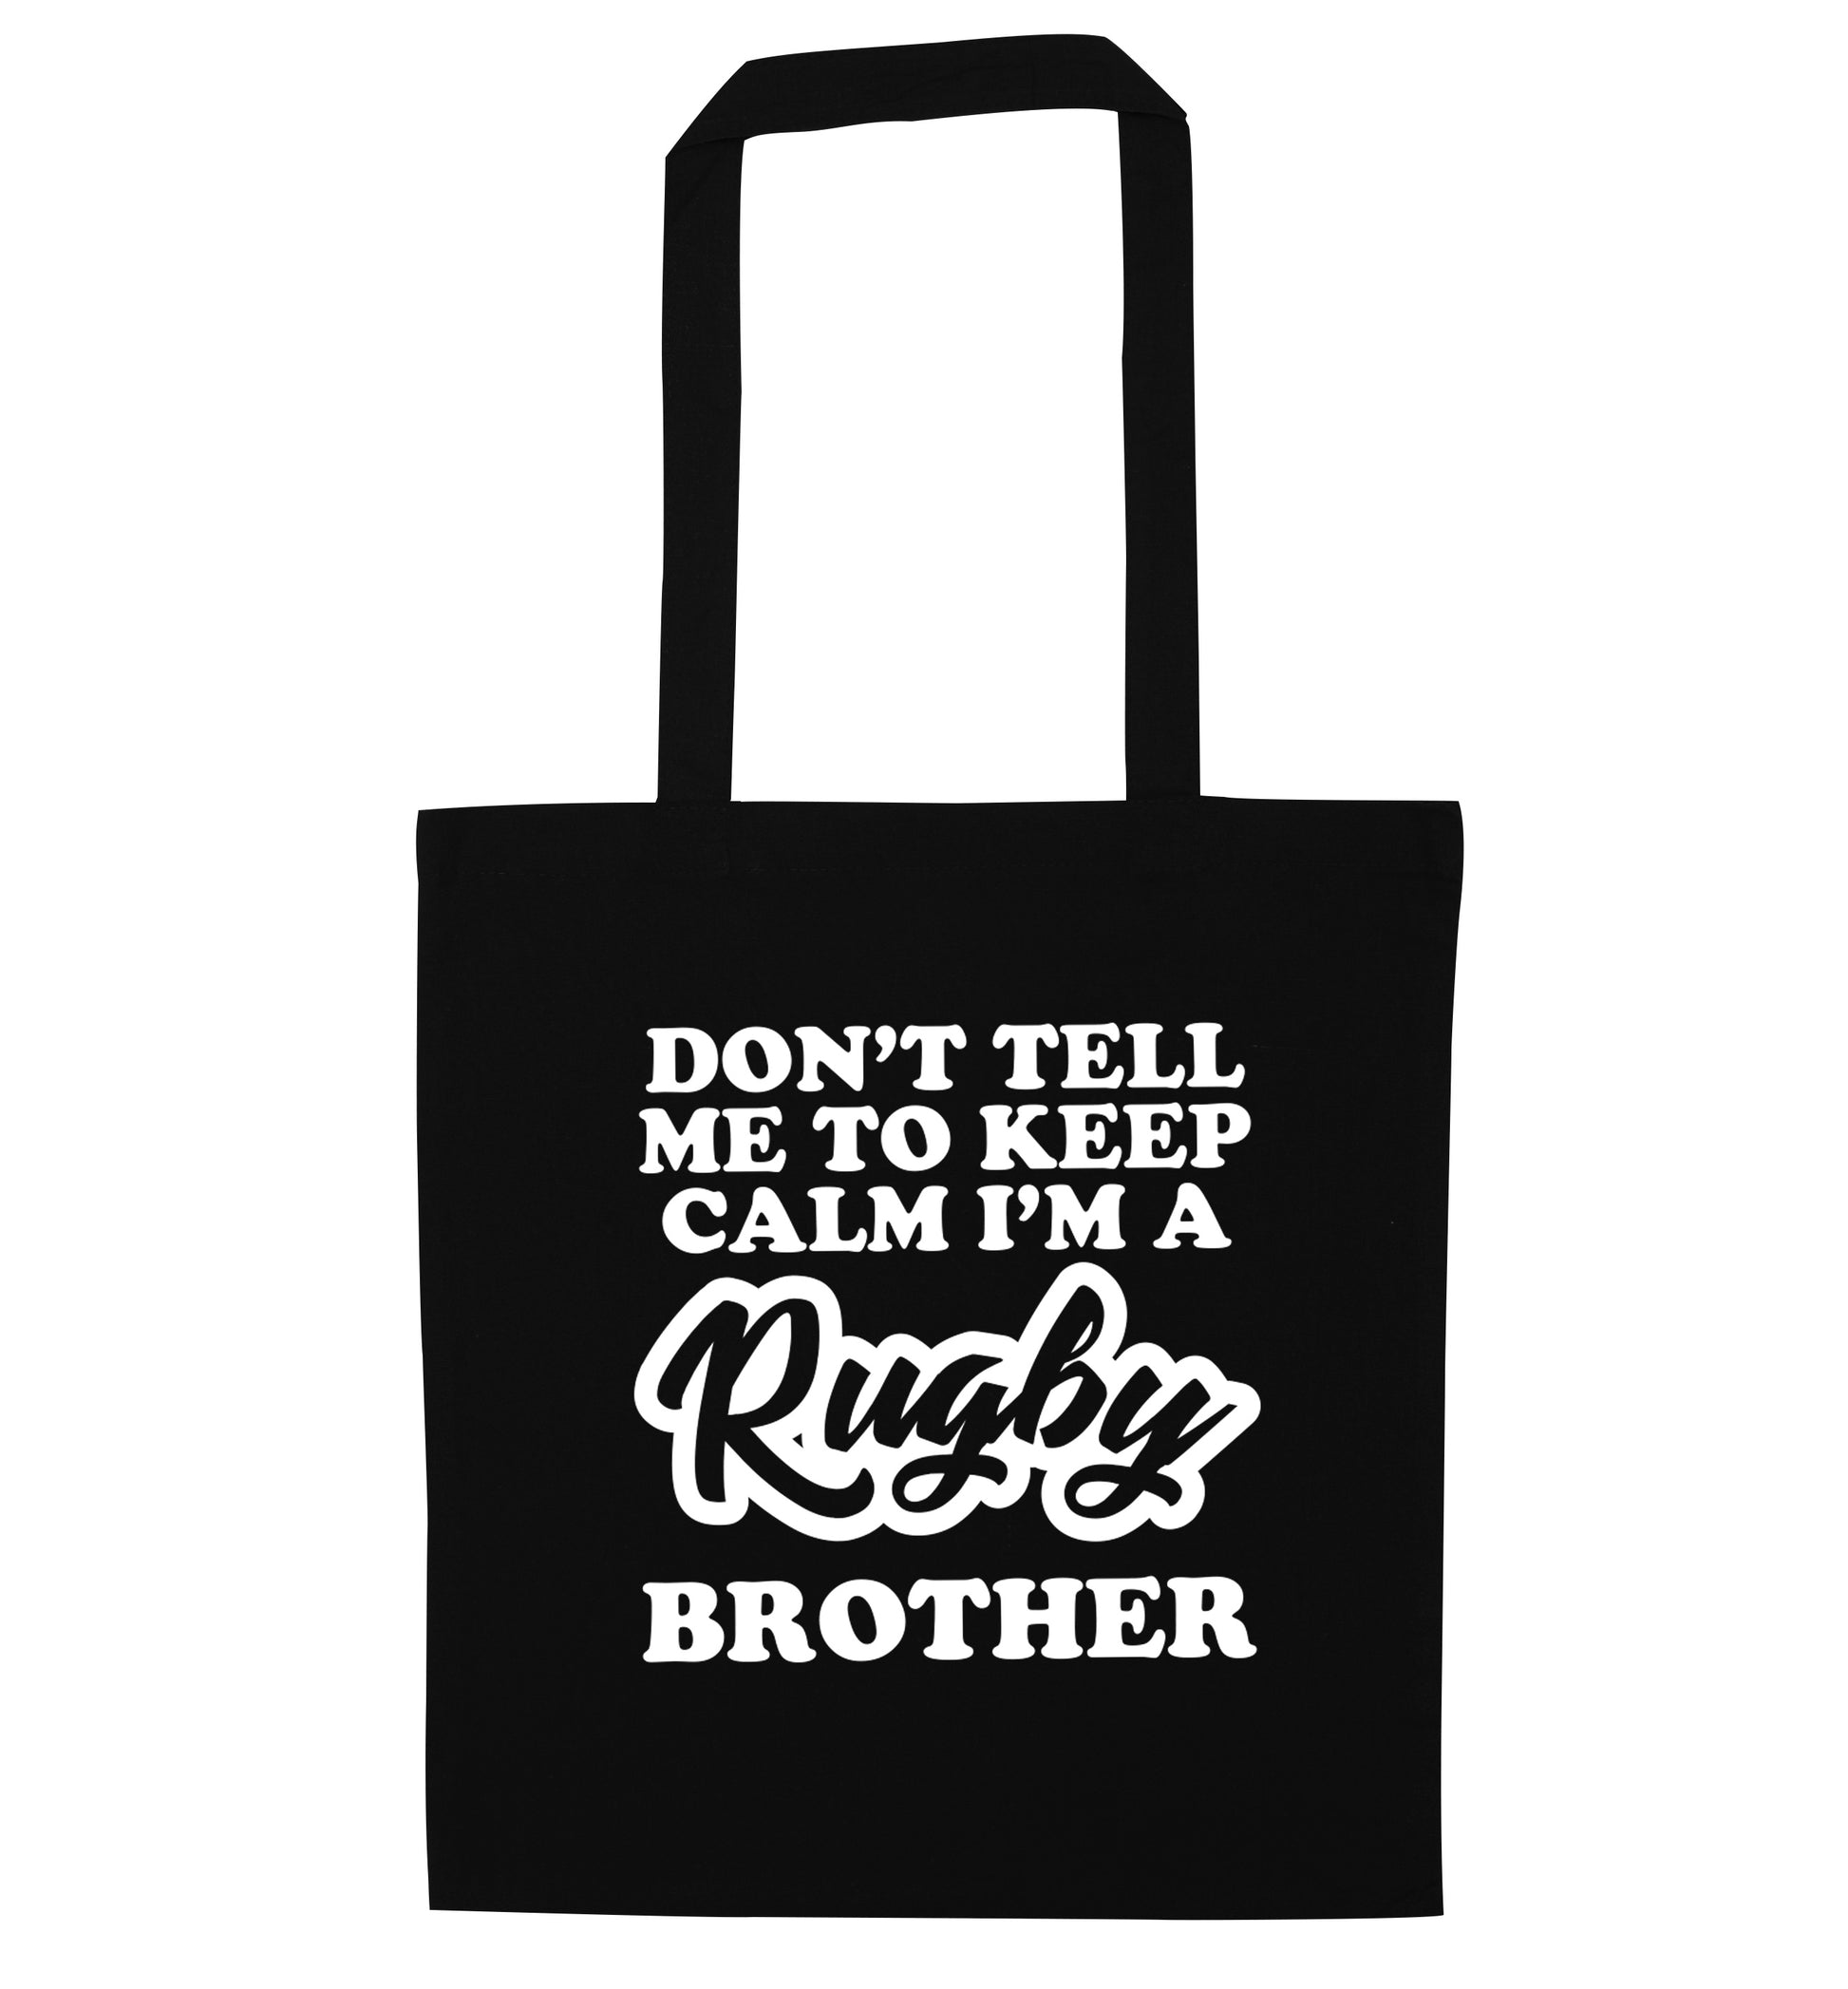 Don't tell me keep calm I'm a rugby brother black tote bag